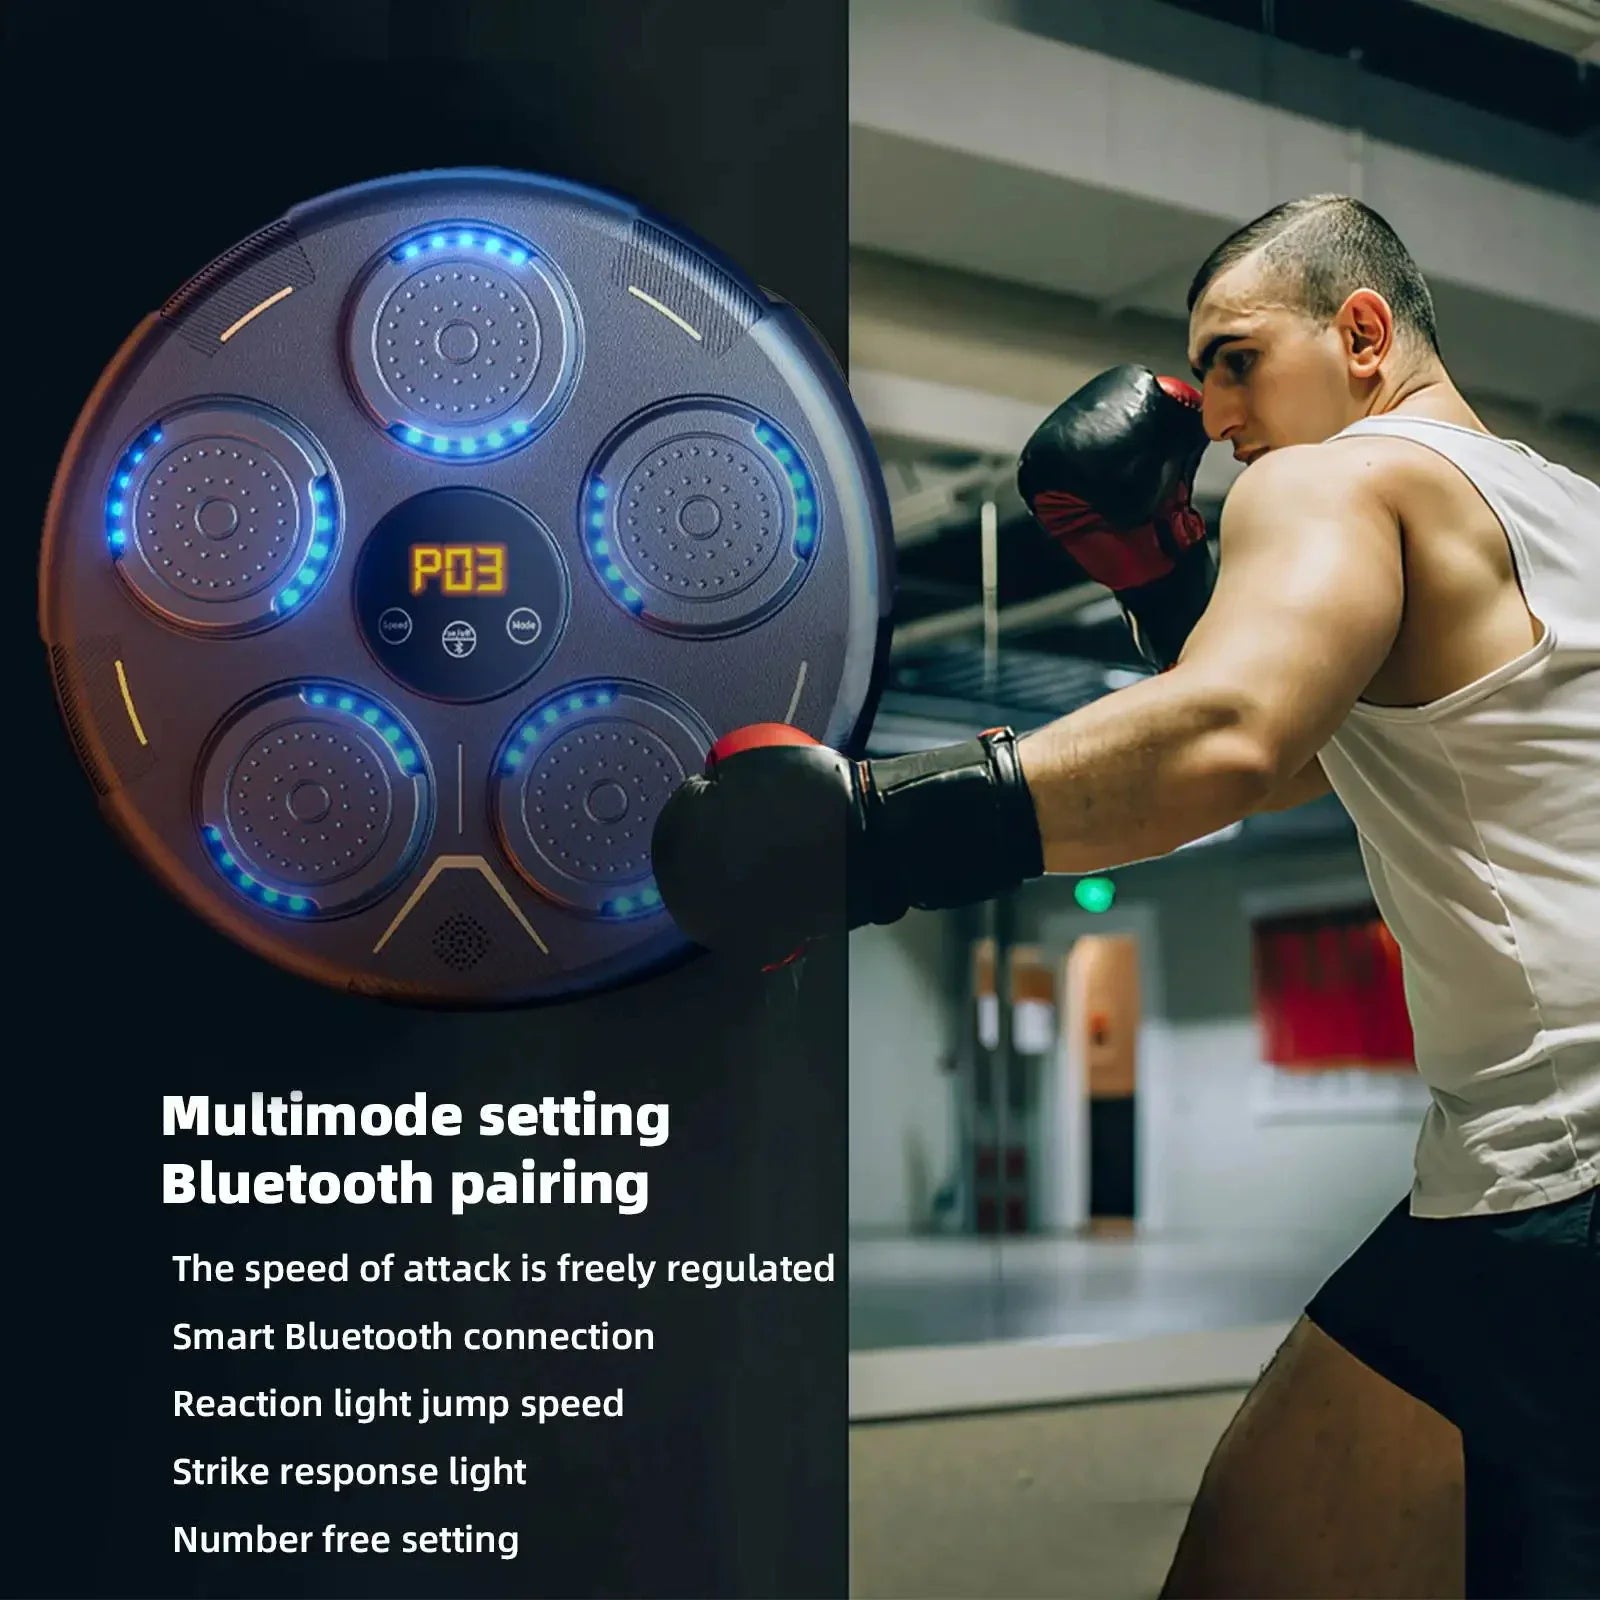 Boxing Target, LED Lighted, Reaction Training